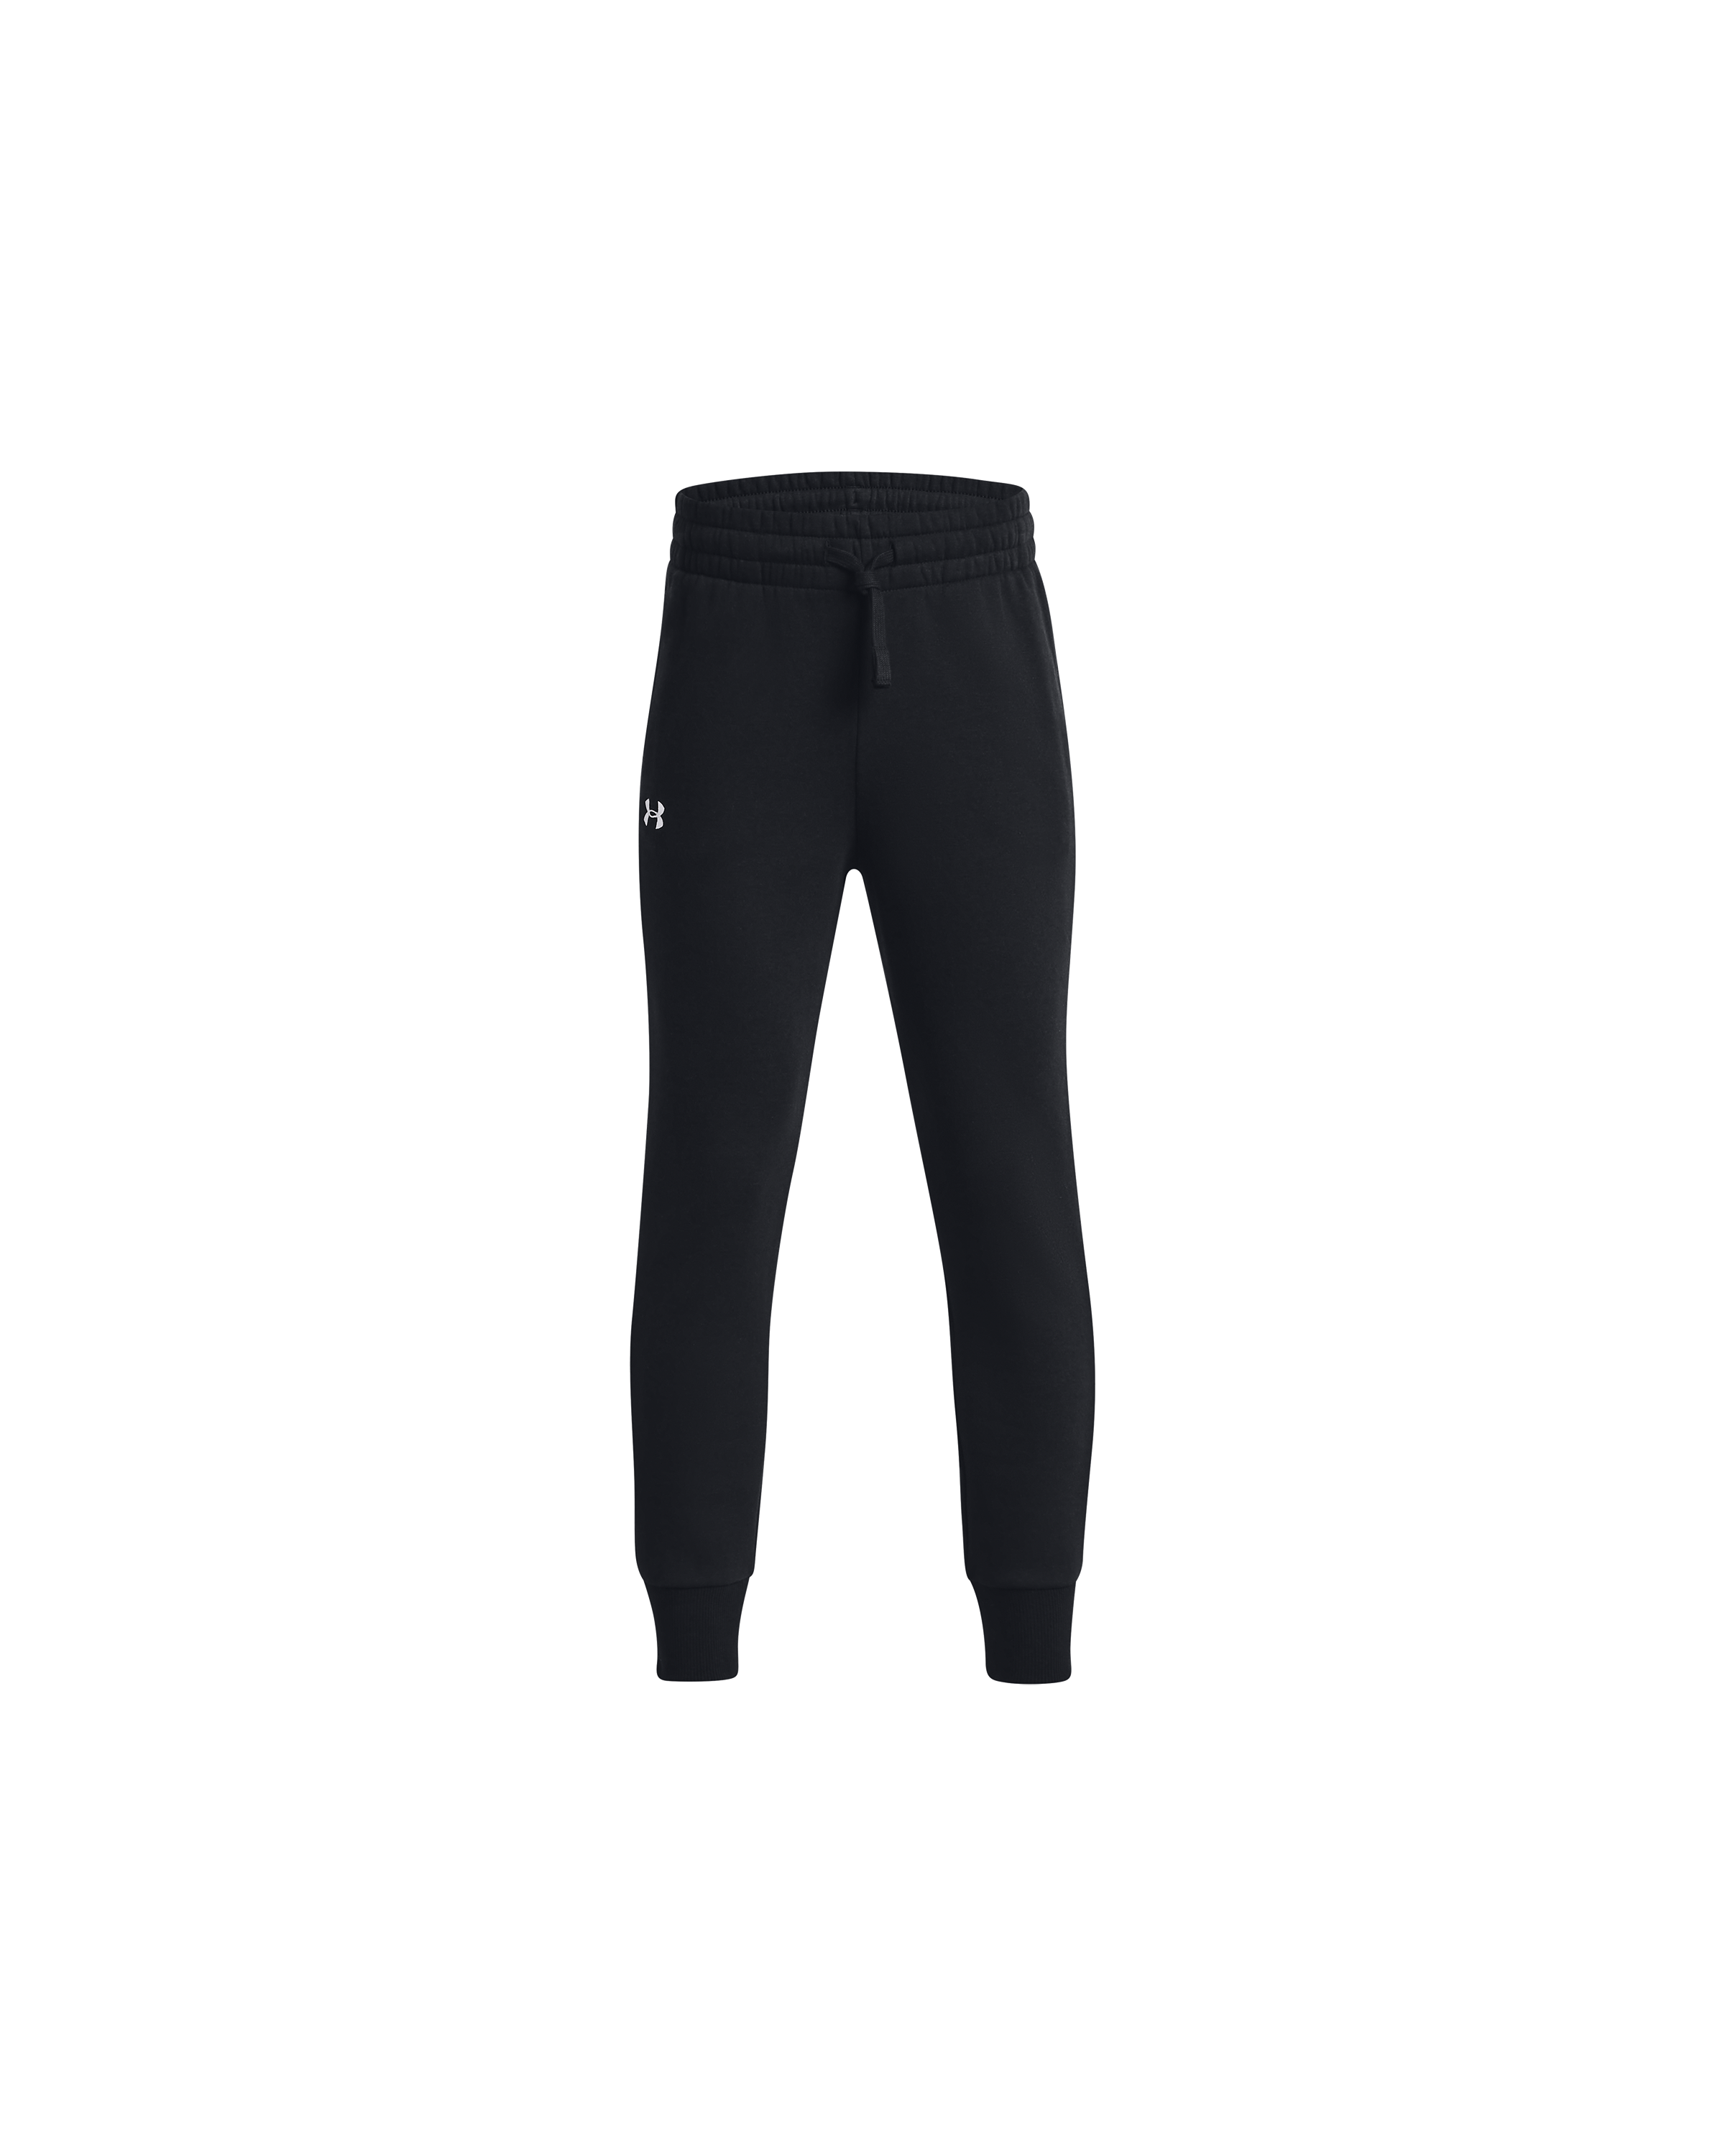 NWT Under Armour athletic pants